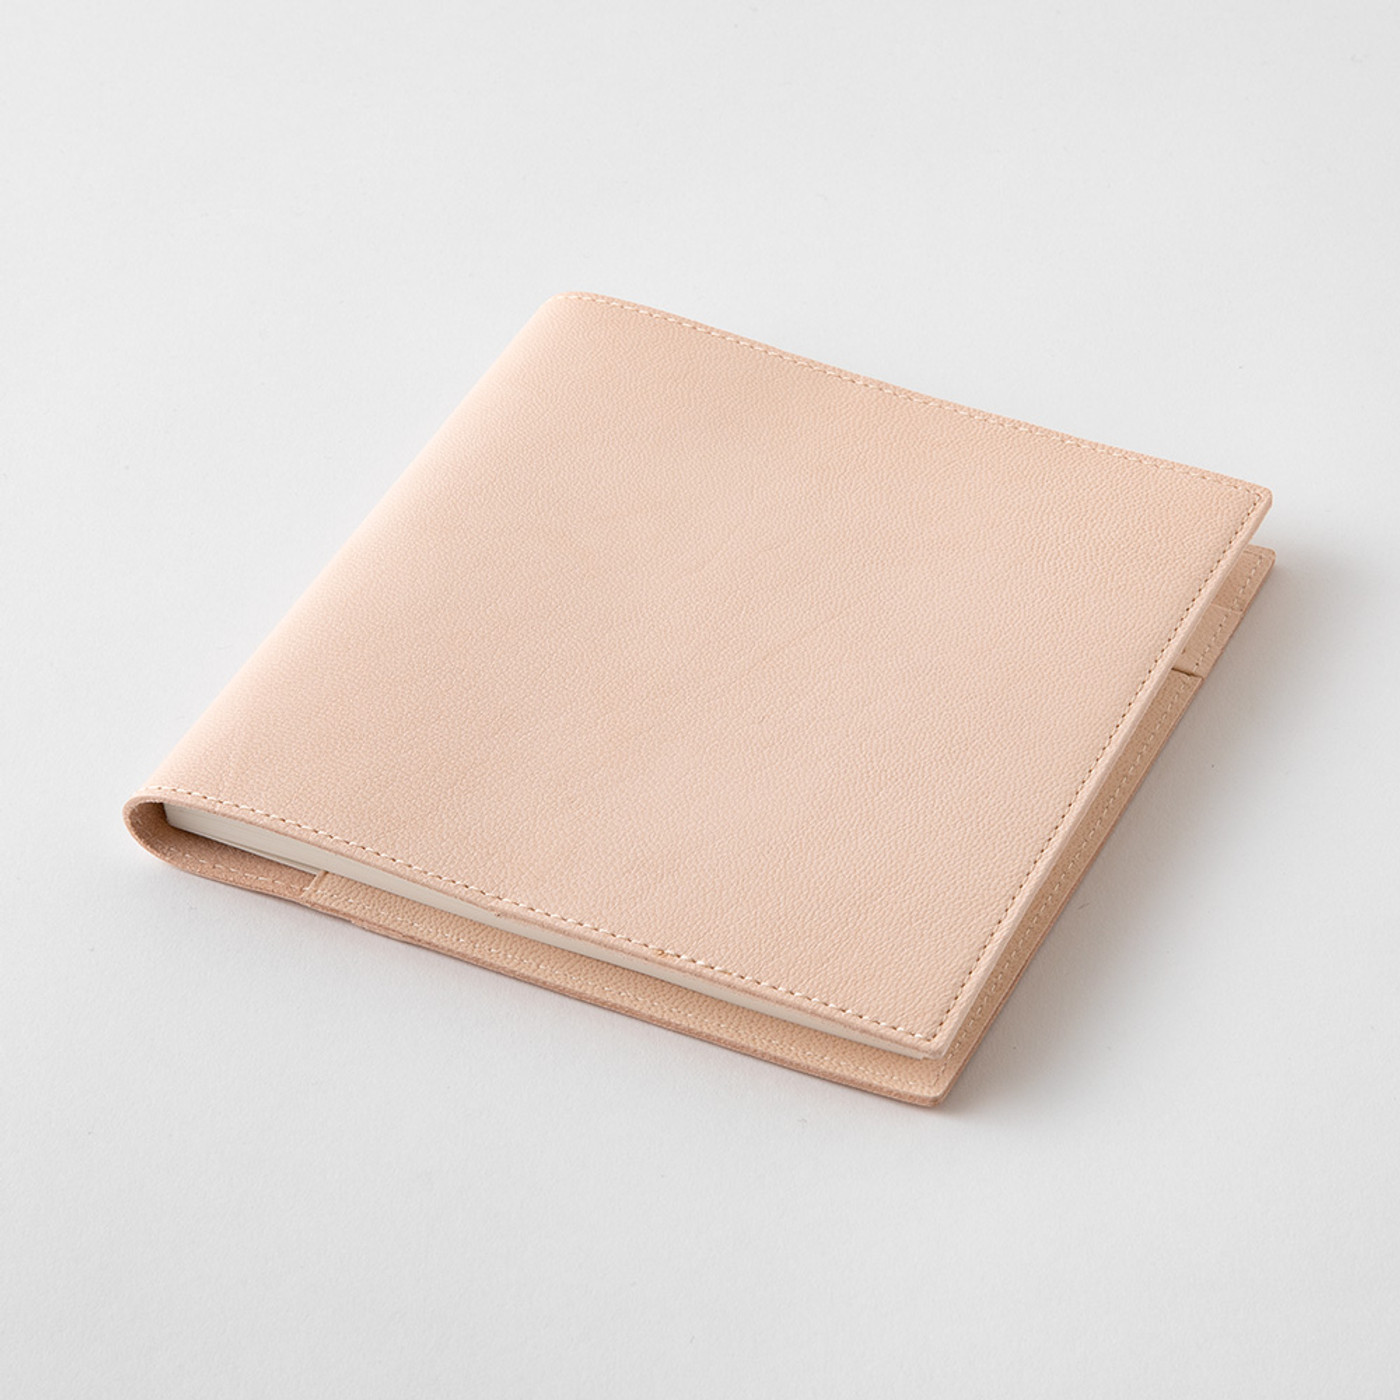 MD Paper notebook cover - LEATHER - A5 square